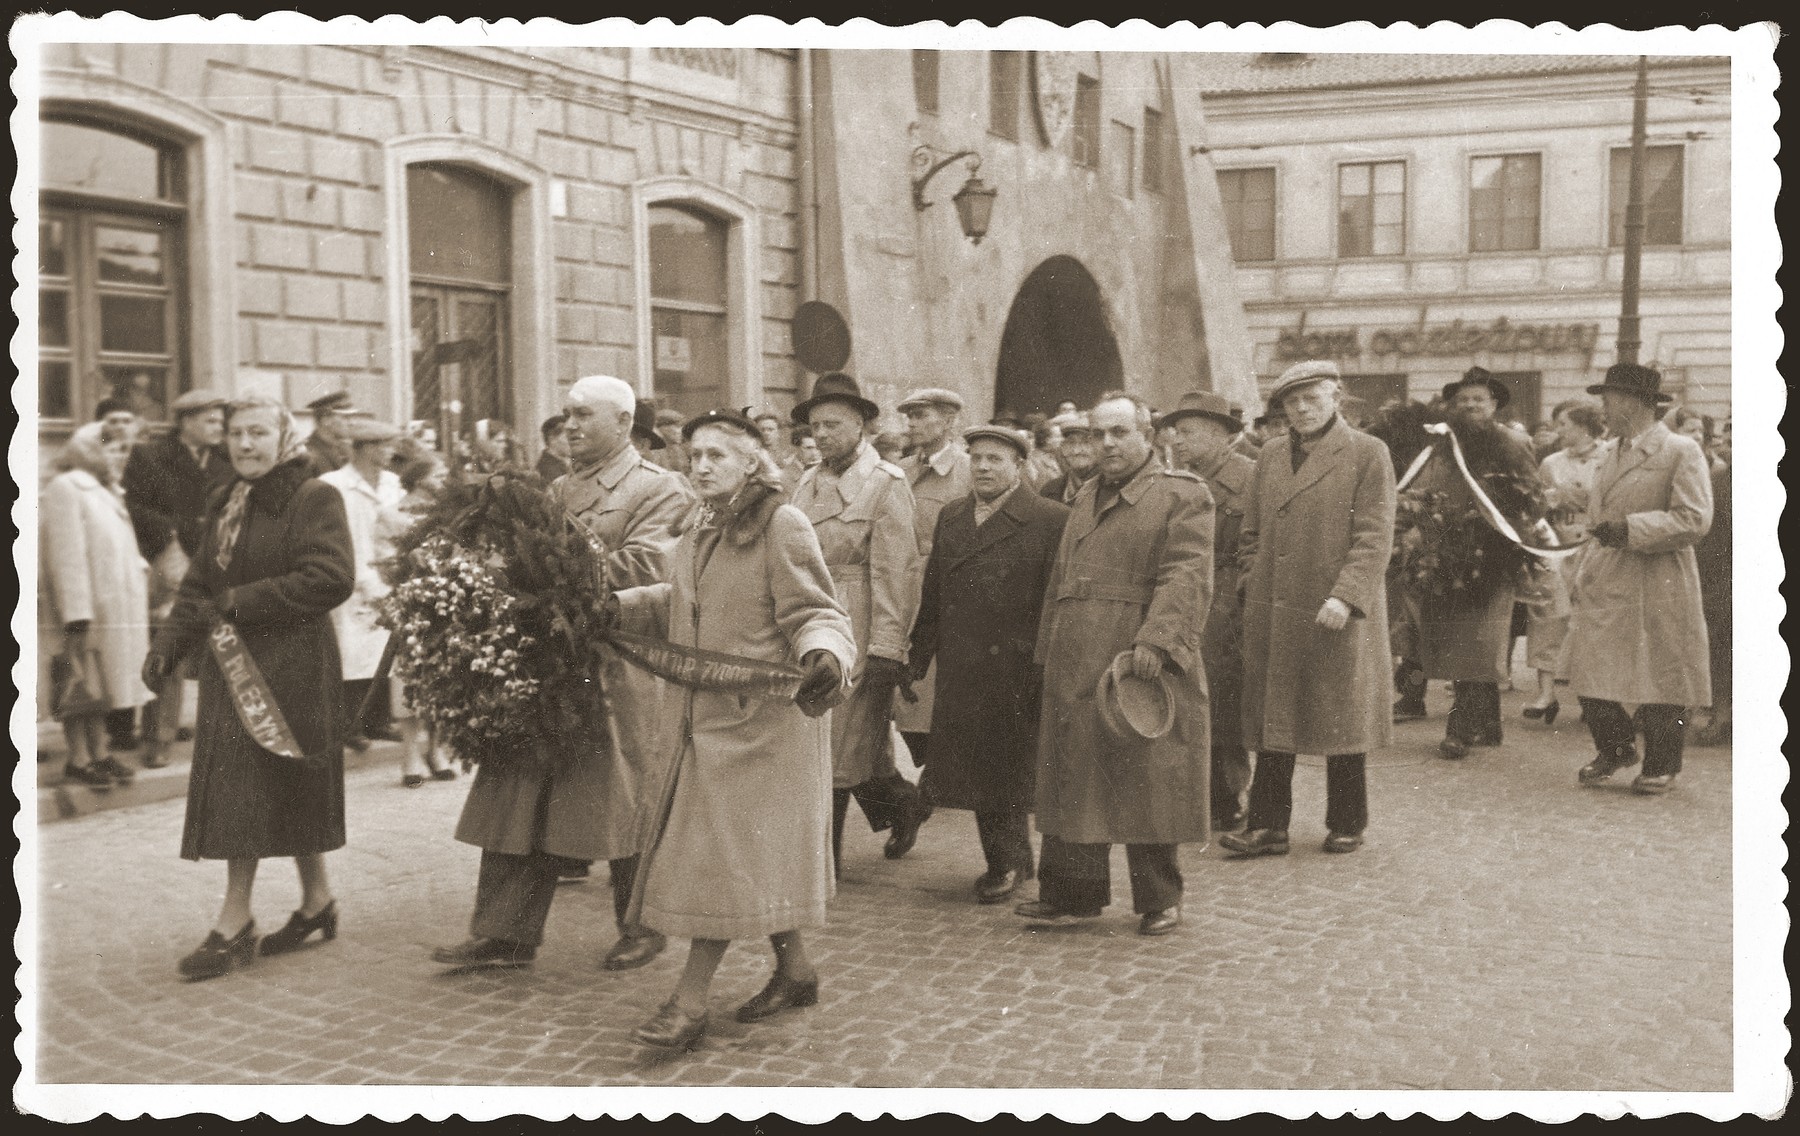 Jewish survivors march through the streets carrying wreaths and ribbons to memorialize the victims of the Holocaust.